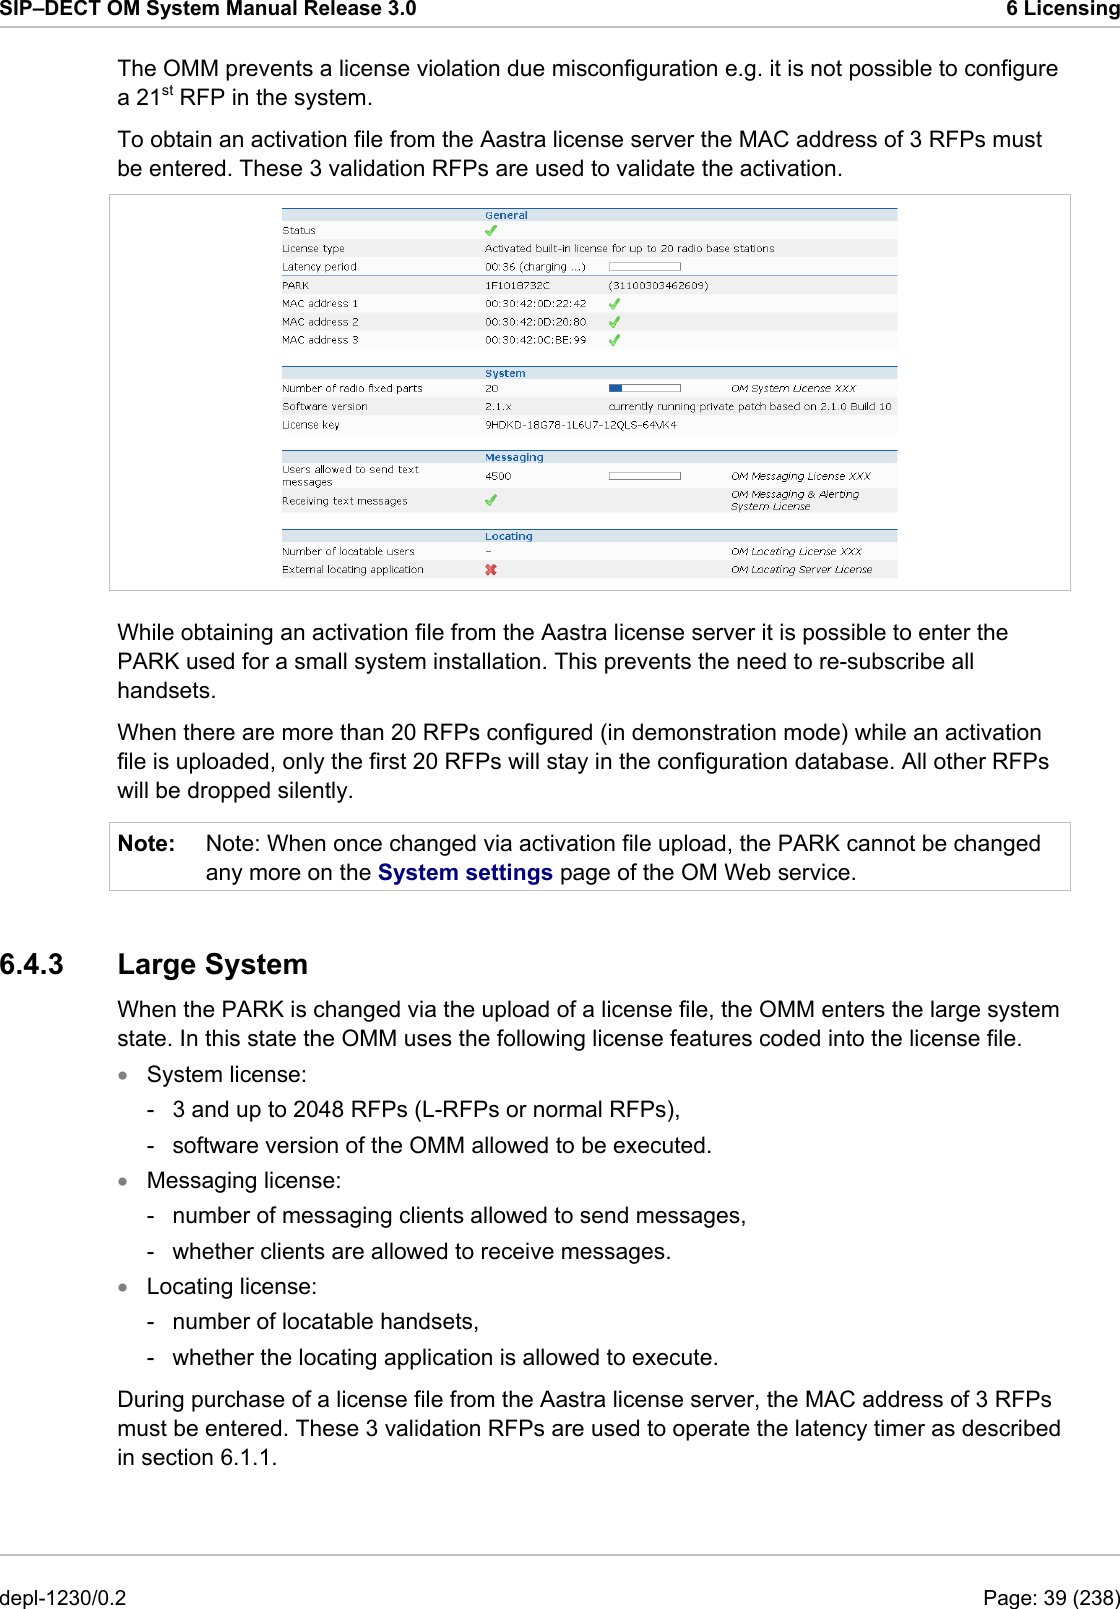 SIP–DECT OM System Manual Release 3.0  6 Licensing The OMM prevents a license violation due misconfiguration e.g. it is not possible to configure a 21st RFP in the system. To obtain an activation file from the Aastra license server the MAC address of 3 RFPs must be entered. These 3 validation RFPs are used to validate the activation.  While obtaining an activation file from the Aastra license server it is possible to enter the PARK used for a small system installation. This prevents the need to re-subscribe all handsets. When there are more than 20 RFPs configured (in demonstration mode) while an activation file is uploaded, only the first 20 RFPs will stay in the configuration database. All other RFPs will be dropped silently. Note:  Note: When once changed via activation file upload, the PARK cannot be changed any more on the System settings page of the OM Web service. 6.4.3 Large System When the PARK is changed via the upload of a license file, the OMM enters the large system state. In this state the OMM uses the following license features coded into the license file. System license: • • • -  3 and up to 2048 RFPs (L-RFPs or normal RFPs), -  software version of the OMM allowed to be executed. Messaging license: -  number of messaging clients allowed to send messages, -  whether clients are allowed to receive messages. Locating license: -  number of locatable handsets, -  whether the locating application is allowed to execute. During purchase of a license file from the Aastra license server, the MAC address of 3 RFPs must be entered. These 3 validation RFPs are used to operate the latency timer as described in section 6.1.1. depl-1230/0.2  Page: 39 (238) 